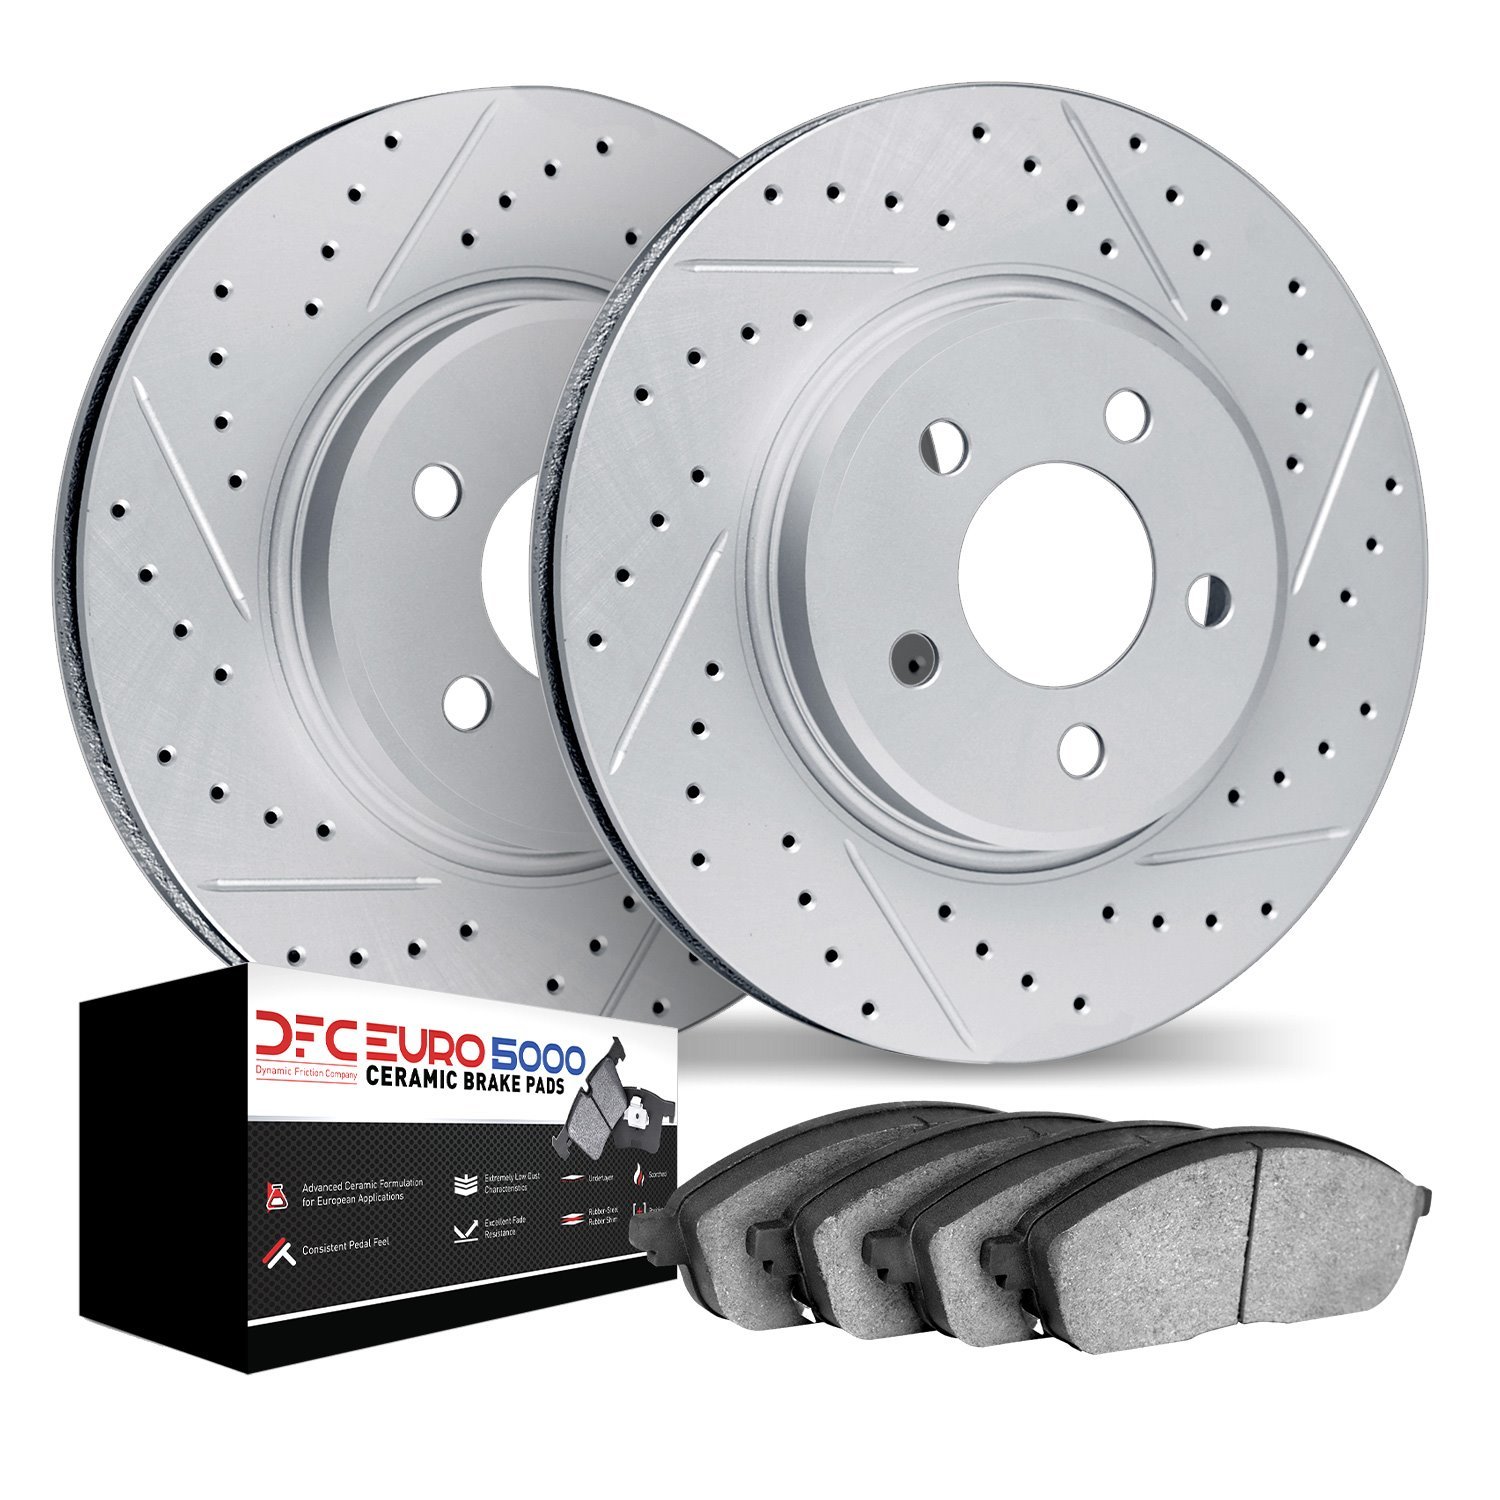 2602-31283 Geoperformance Drilled/Slotted Rotors w/5000 Euro Ceramic Brake Pads Kit, Fits Select Multiple Makes/Models, Position